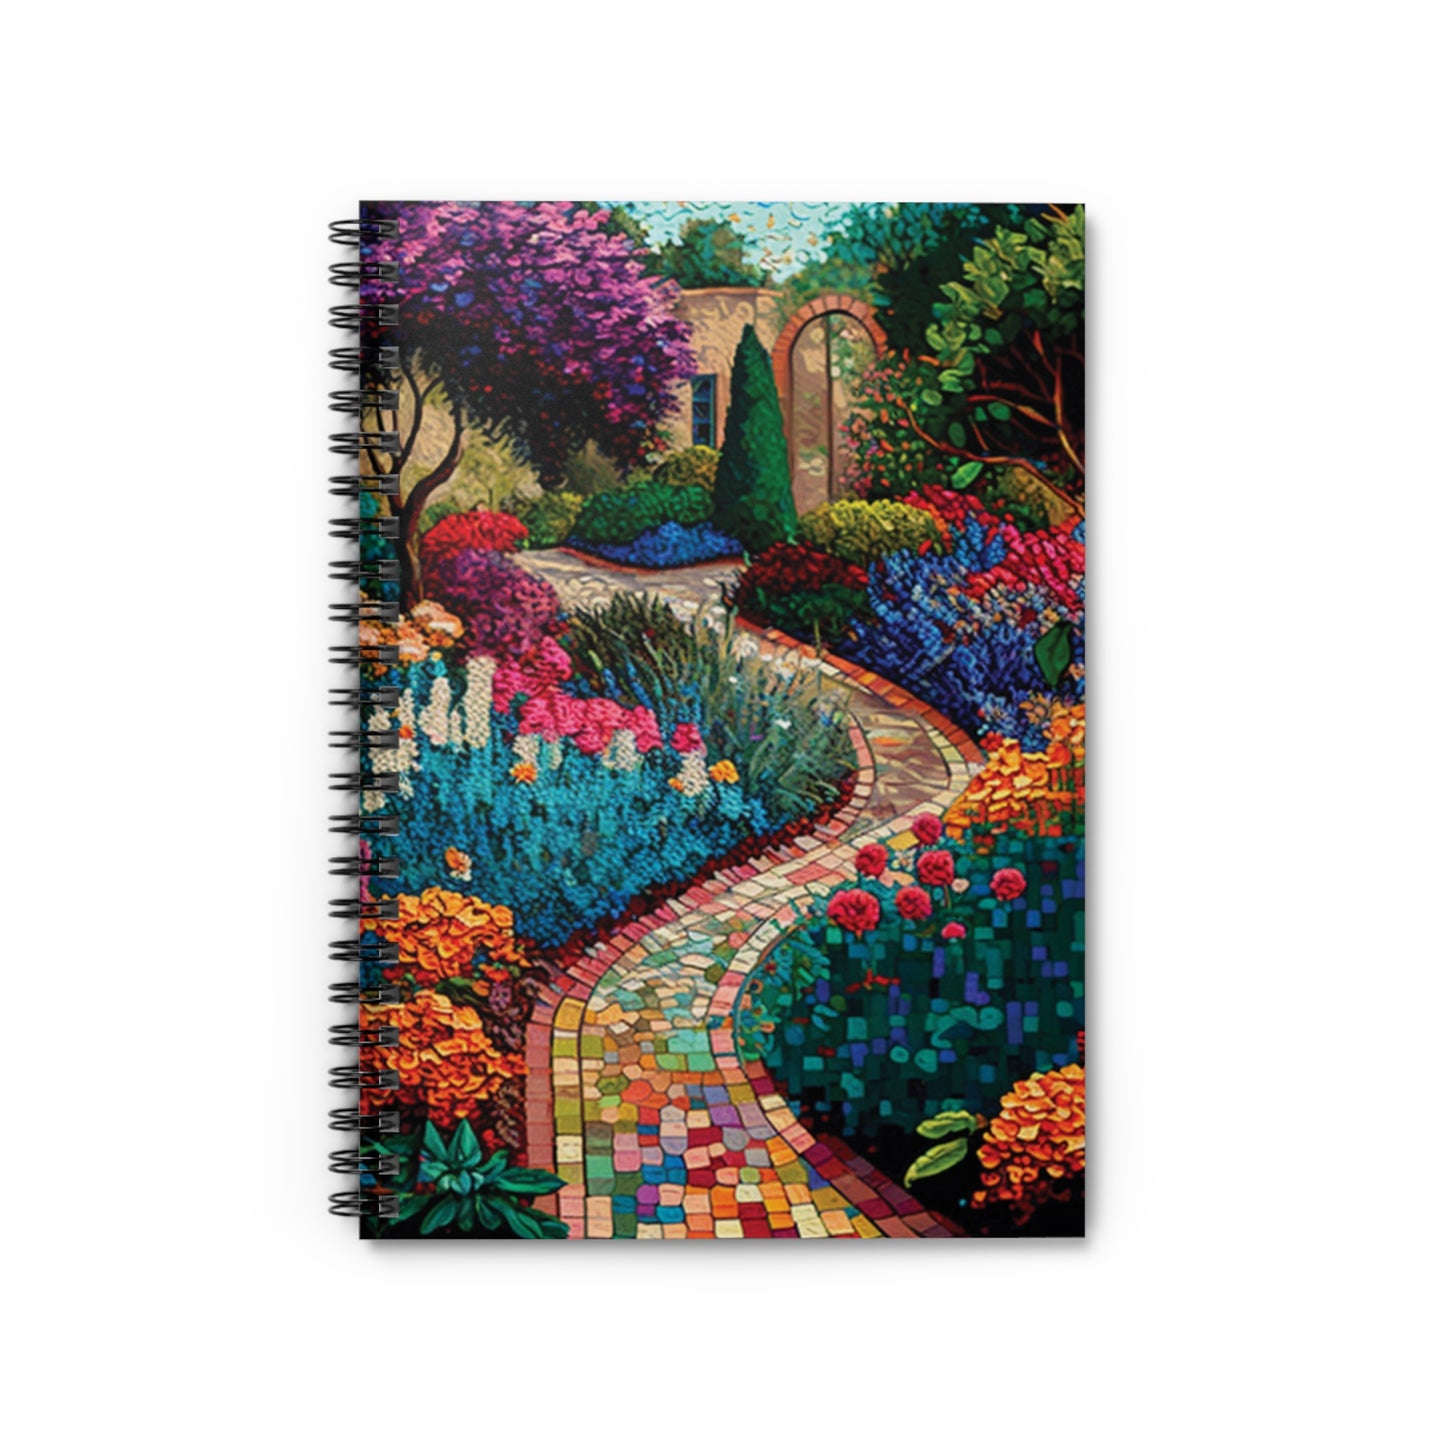 spiral notebook - Ruled Line - A mosaic colorful garden